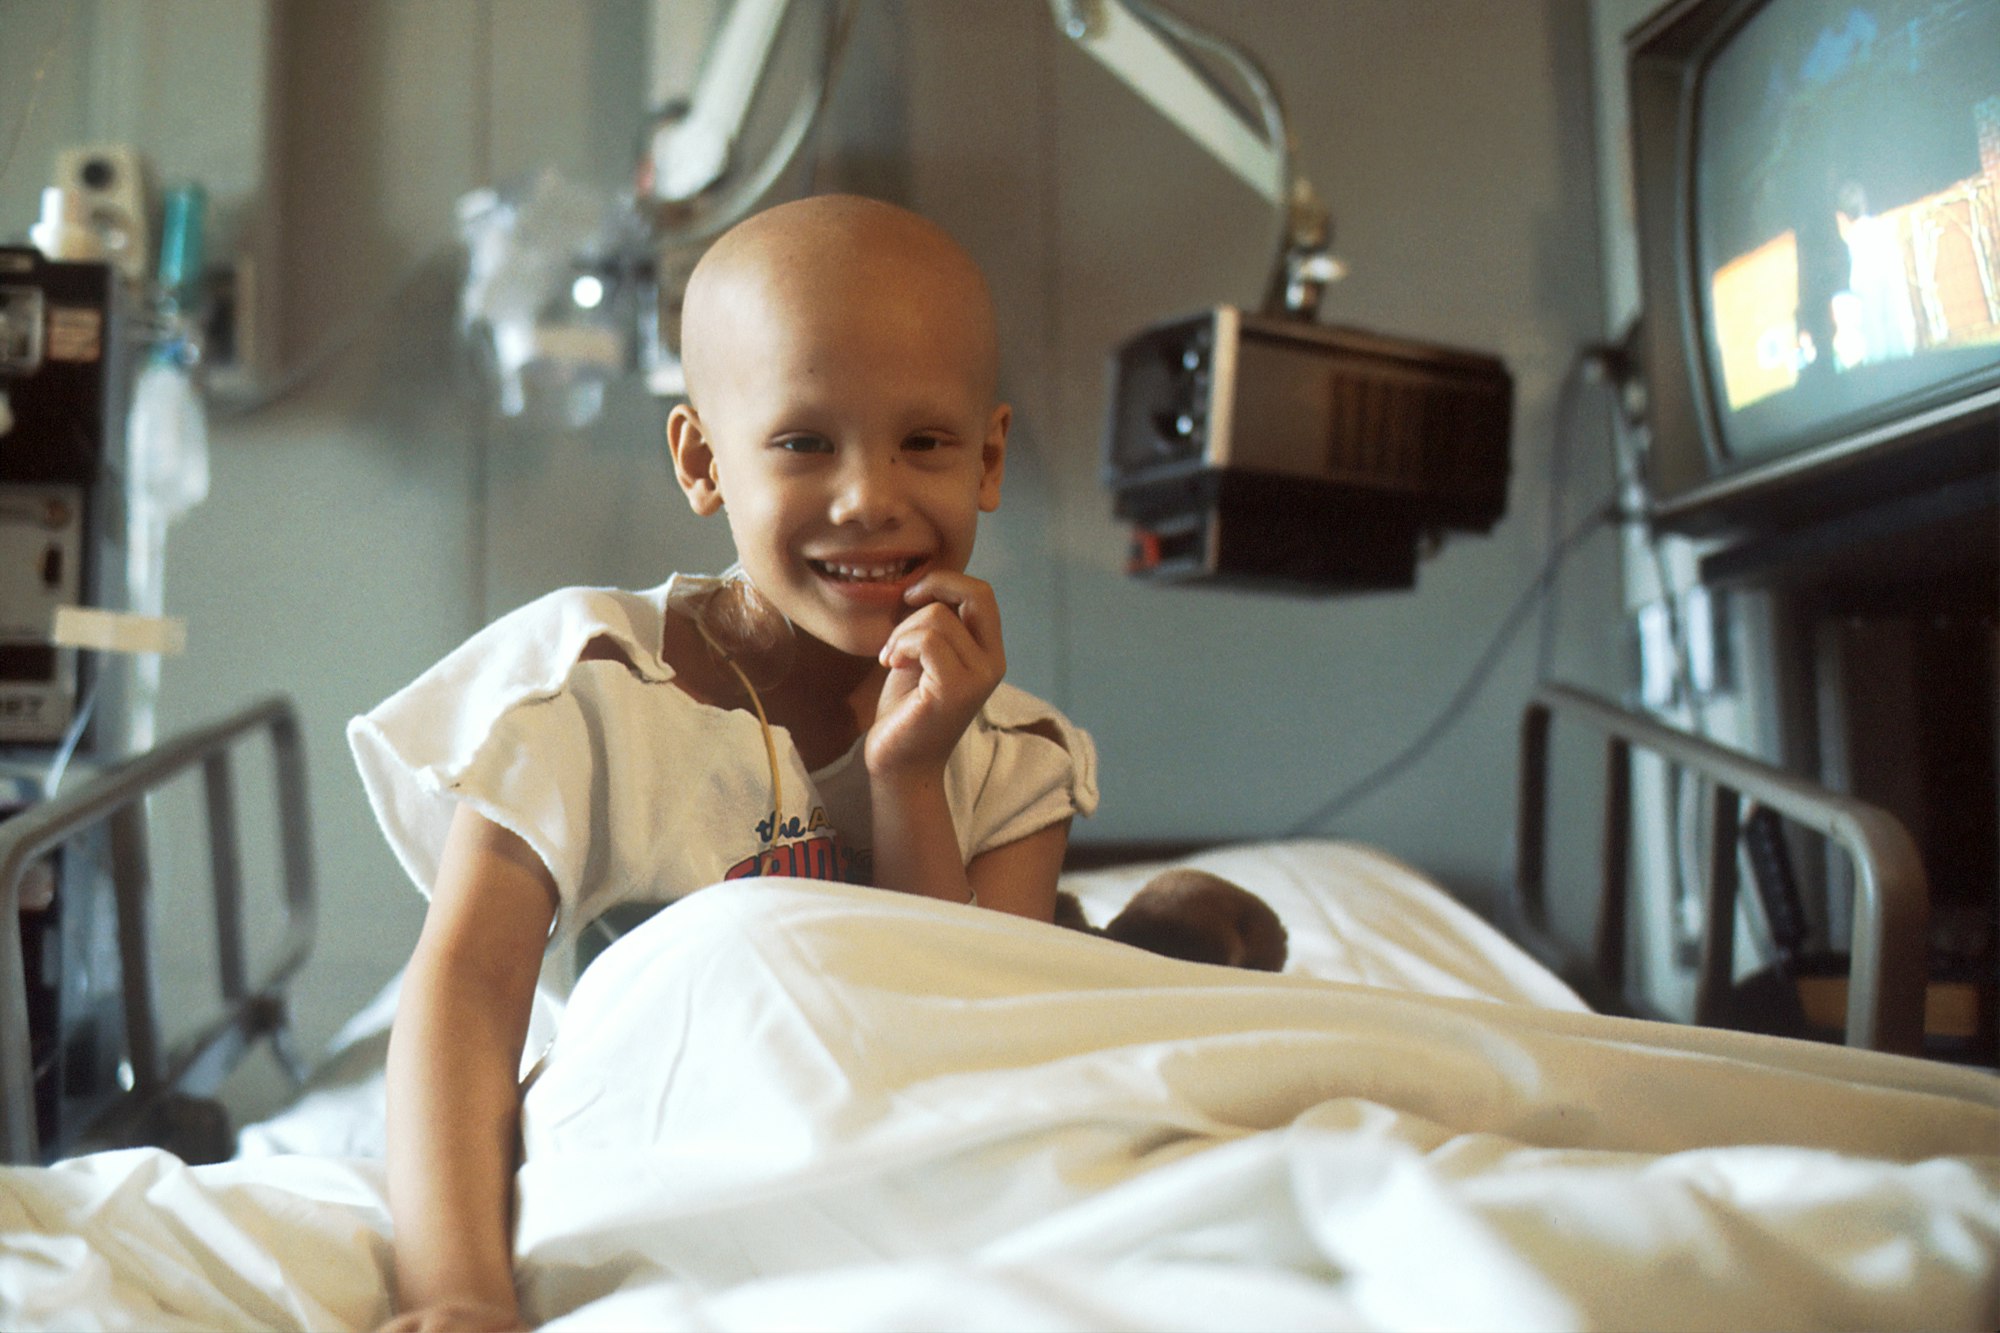 Childhood cancer, a public health problem in the world